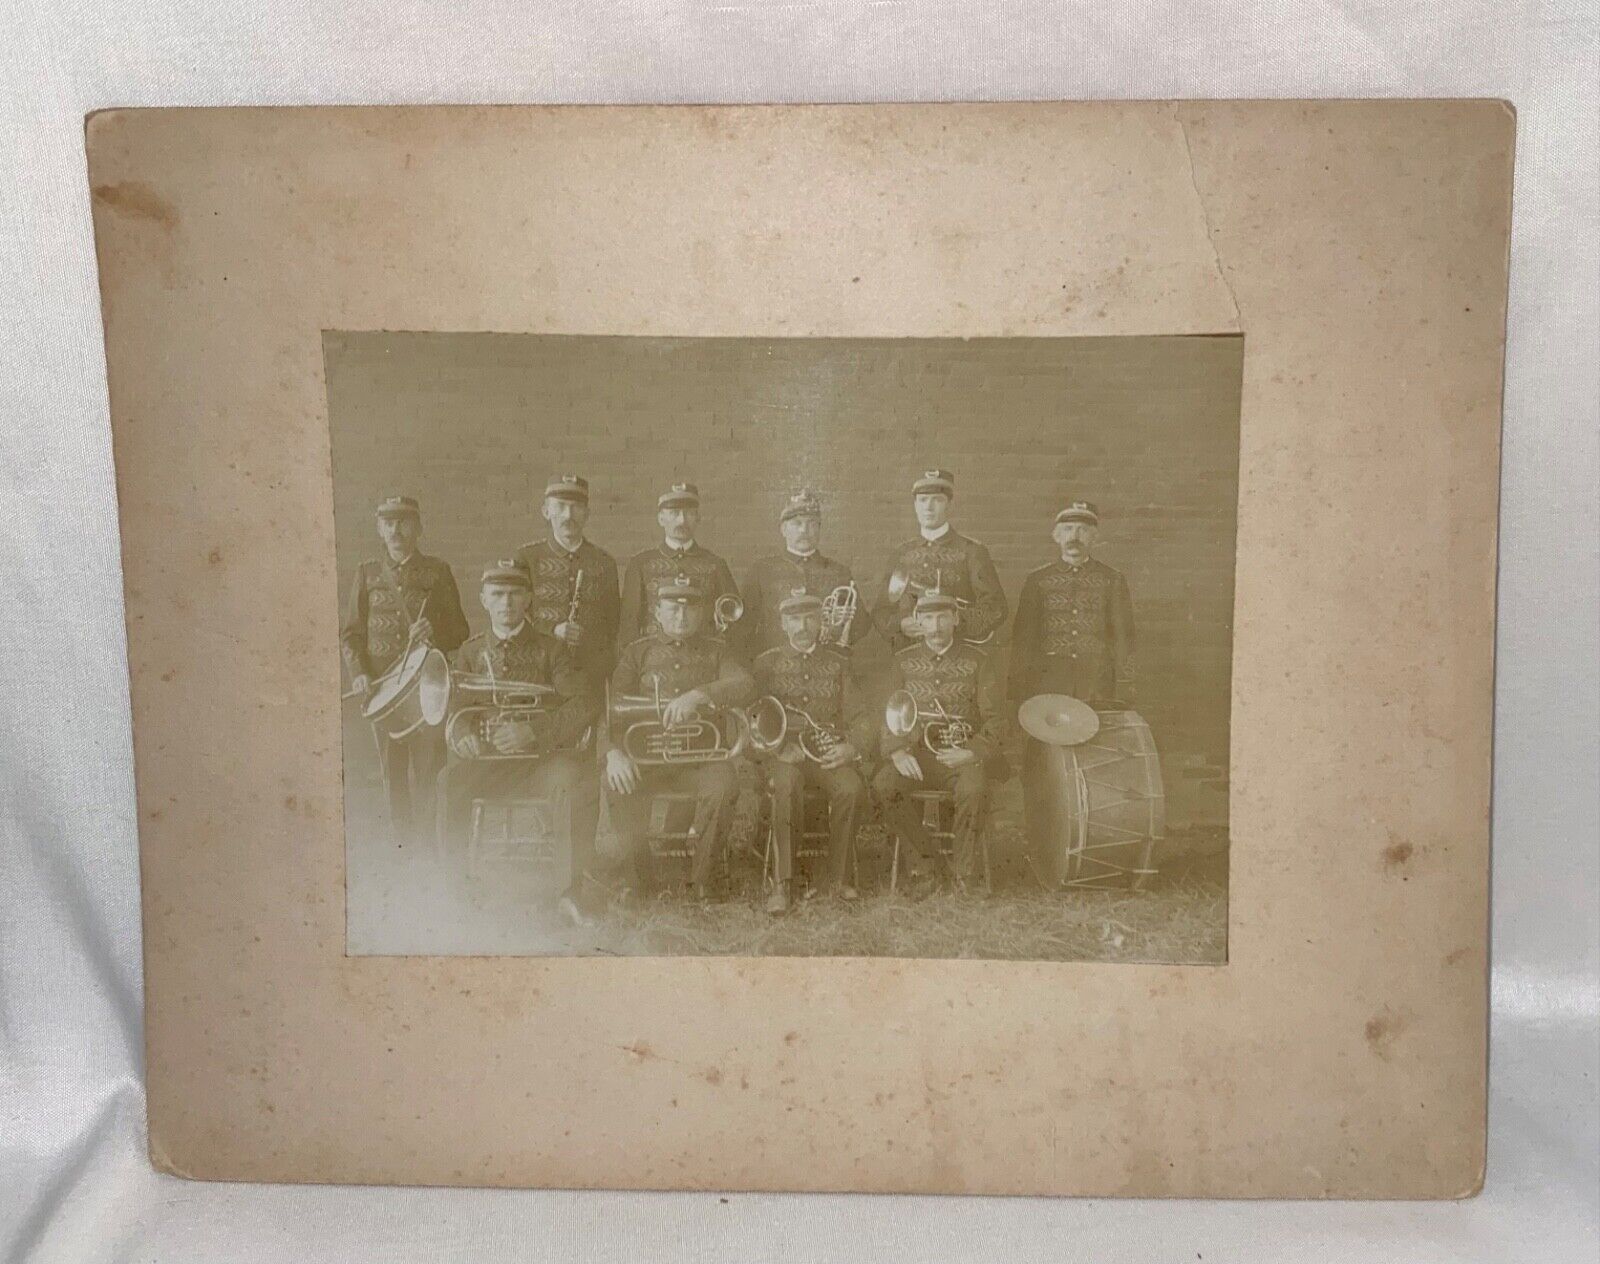 1870s Indian Wars US Army Band Cabinet Card Photograph Image Size 6.5” x 4.5”